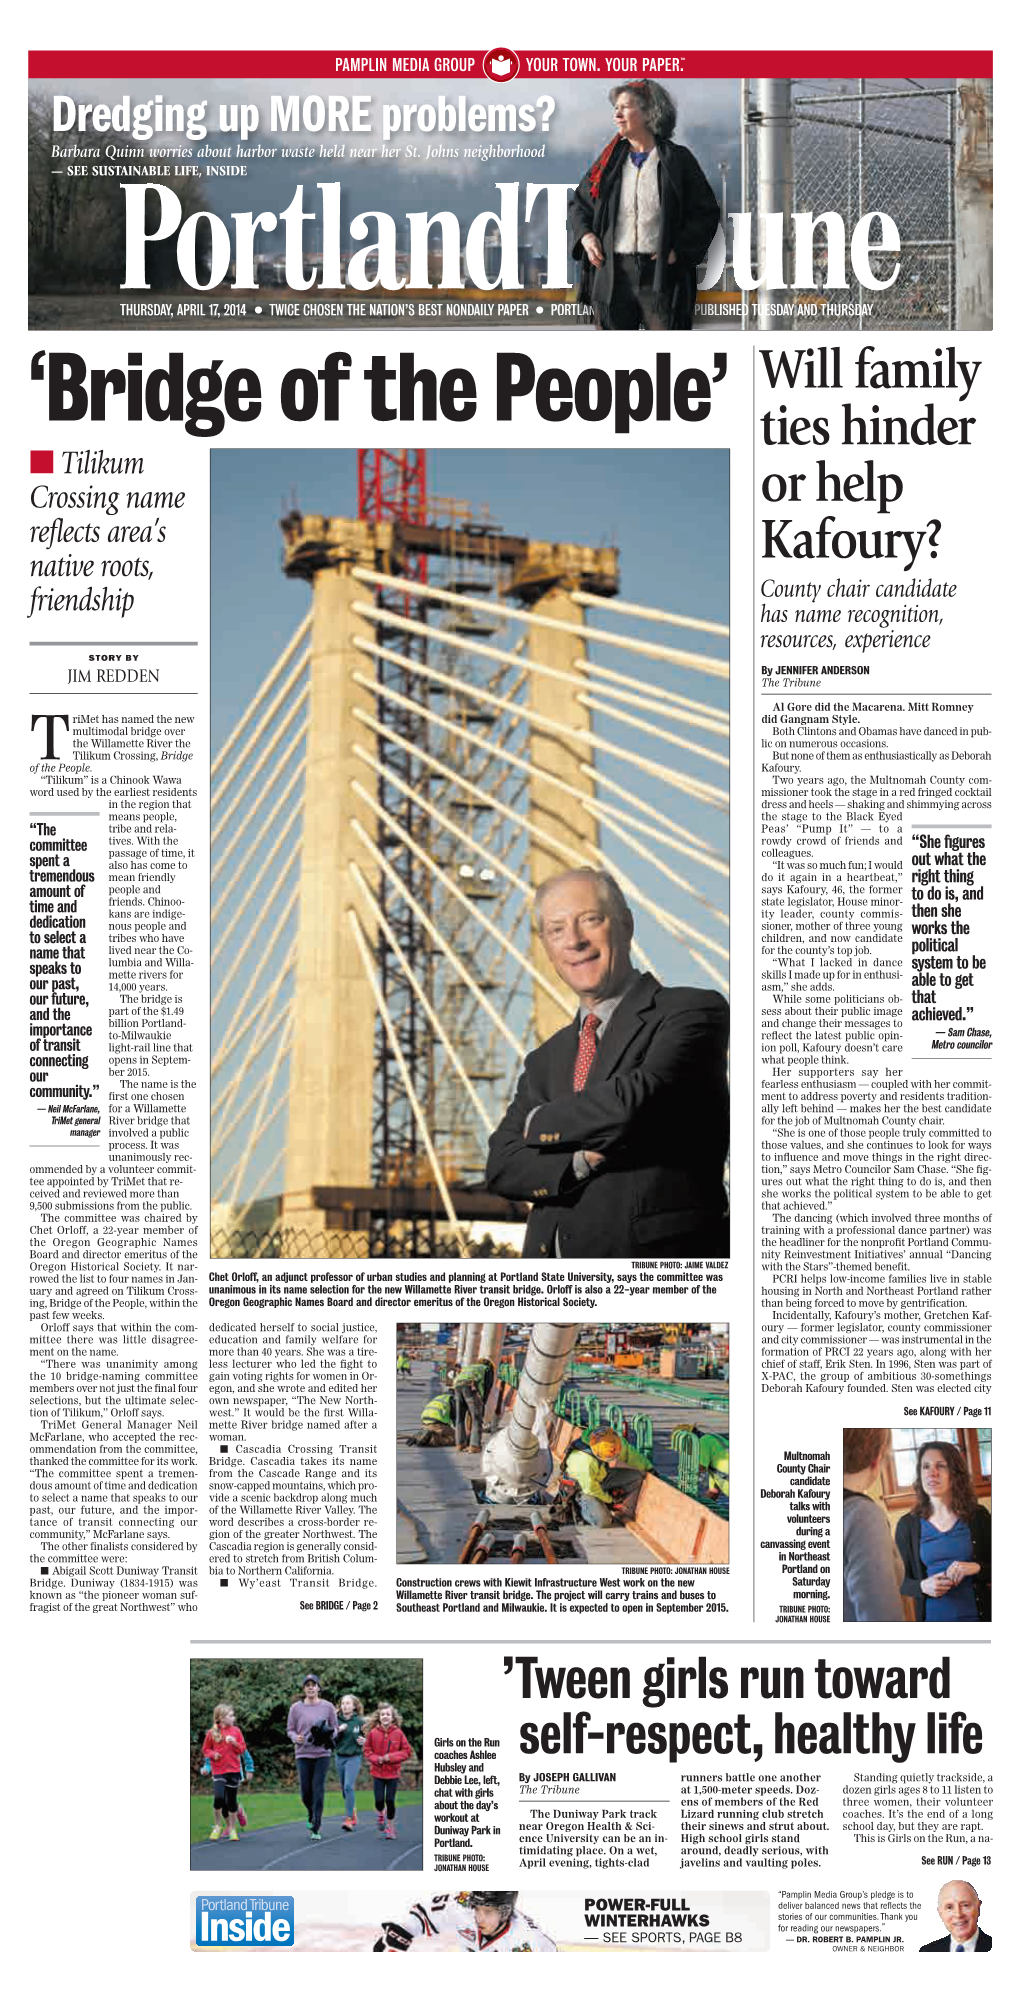 Kafoury? County Chair Candidate Friendship Has Name Recognition, Resources, Experience STORY by by JENNIF ER ANDERSON JIM REDDEN the Tribune